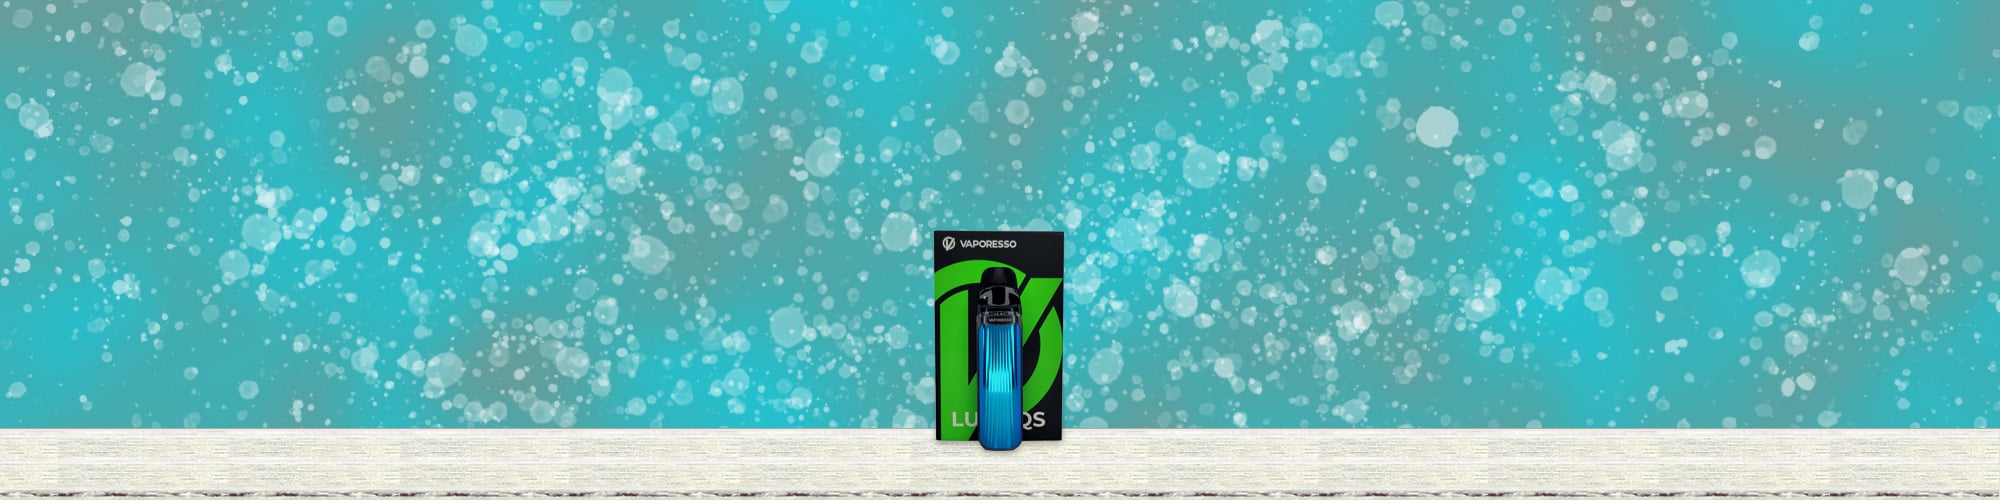 VAPORESSO Luxe QS Review Main Banner